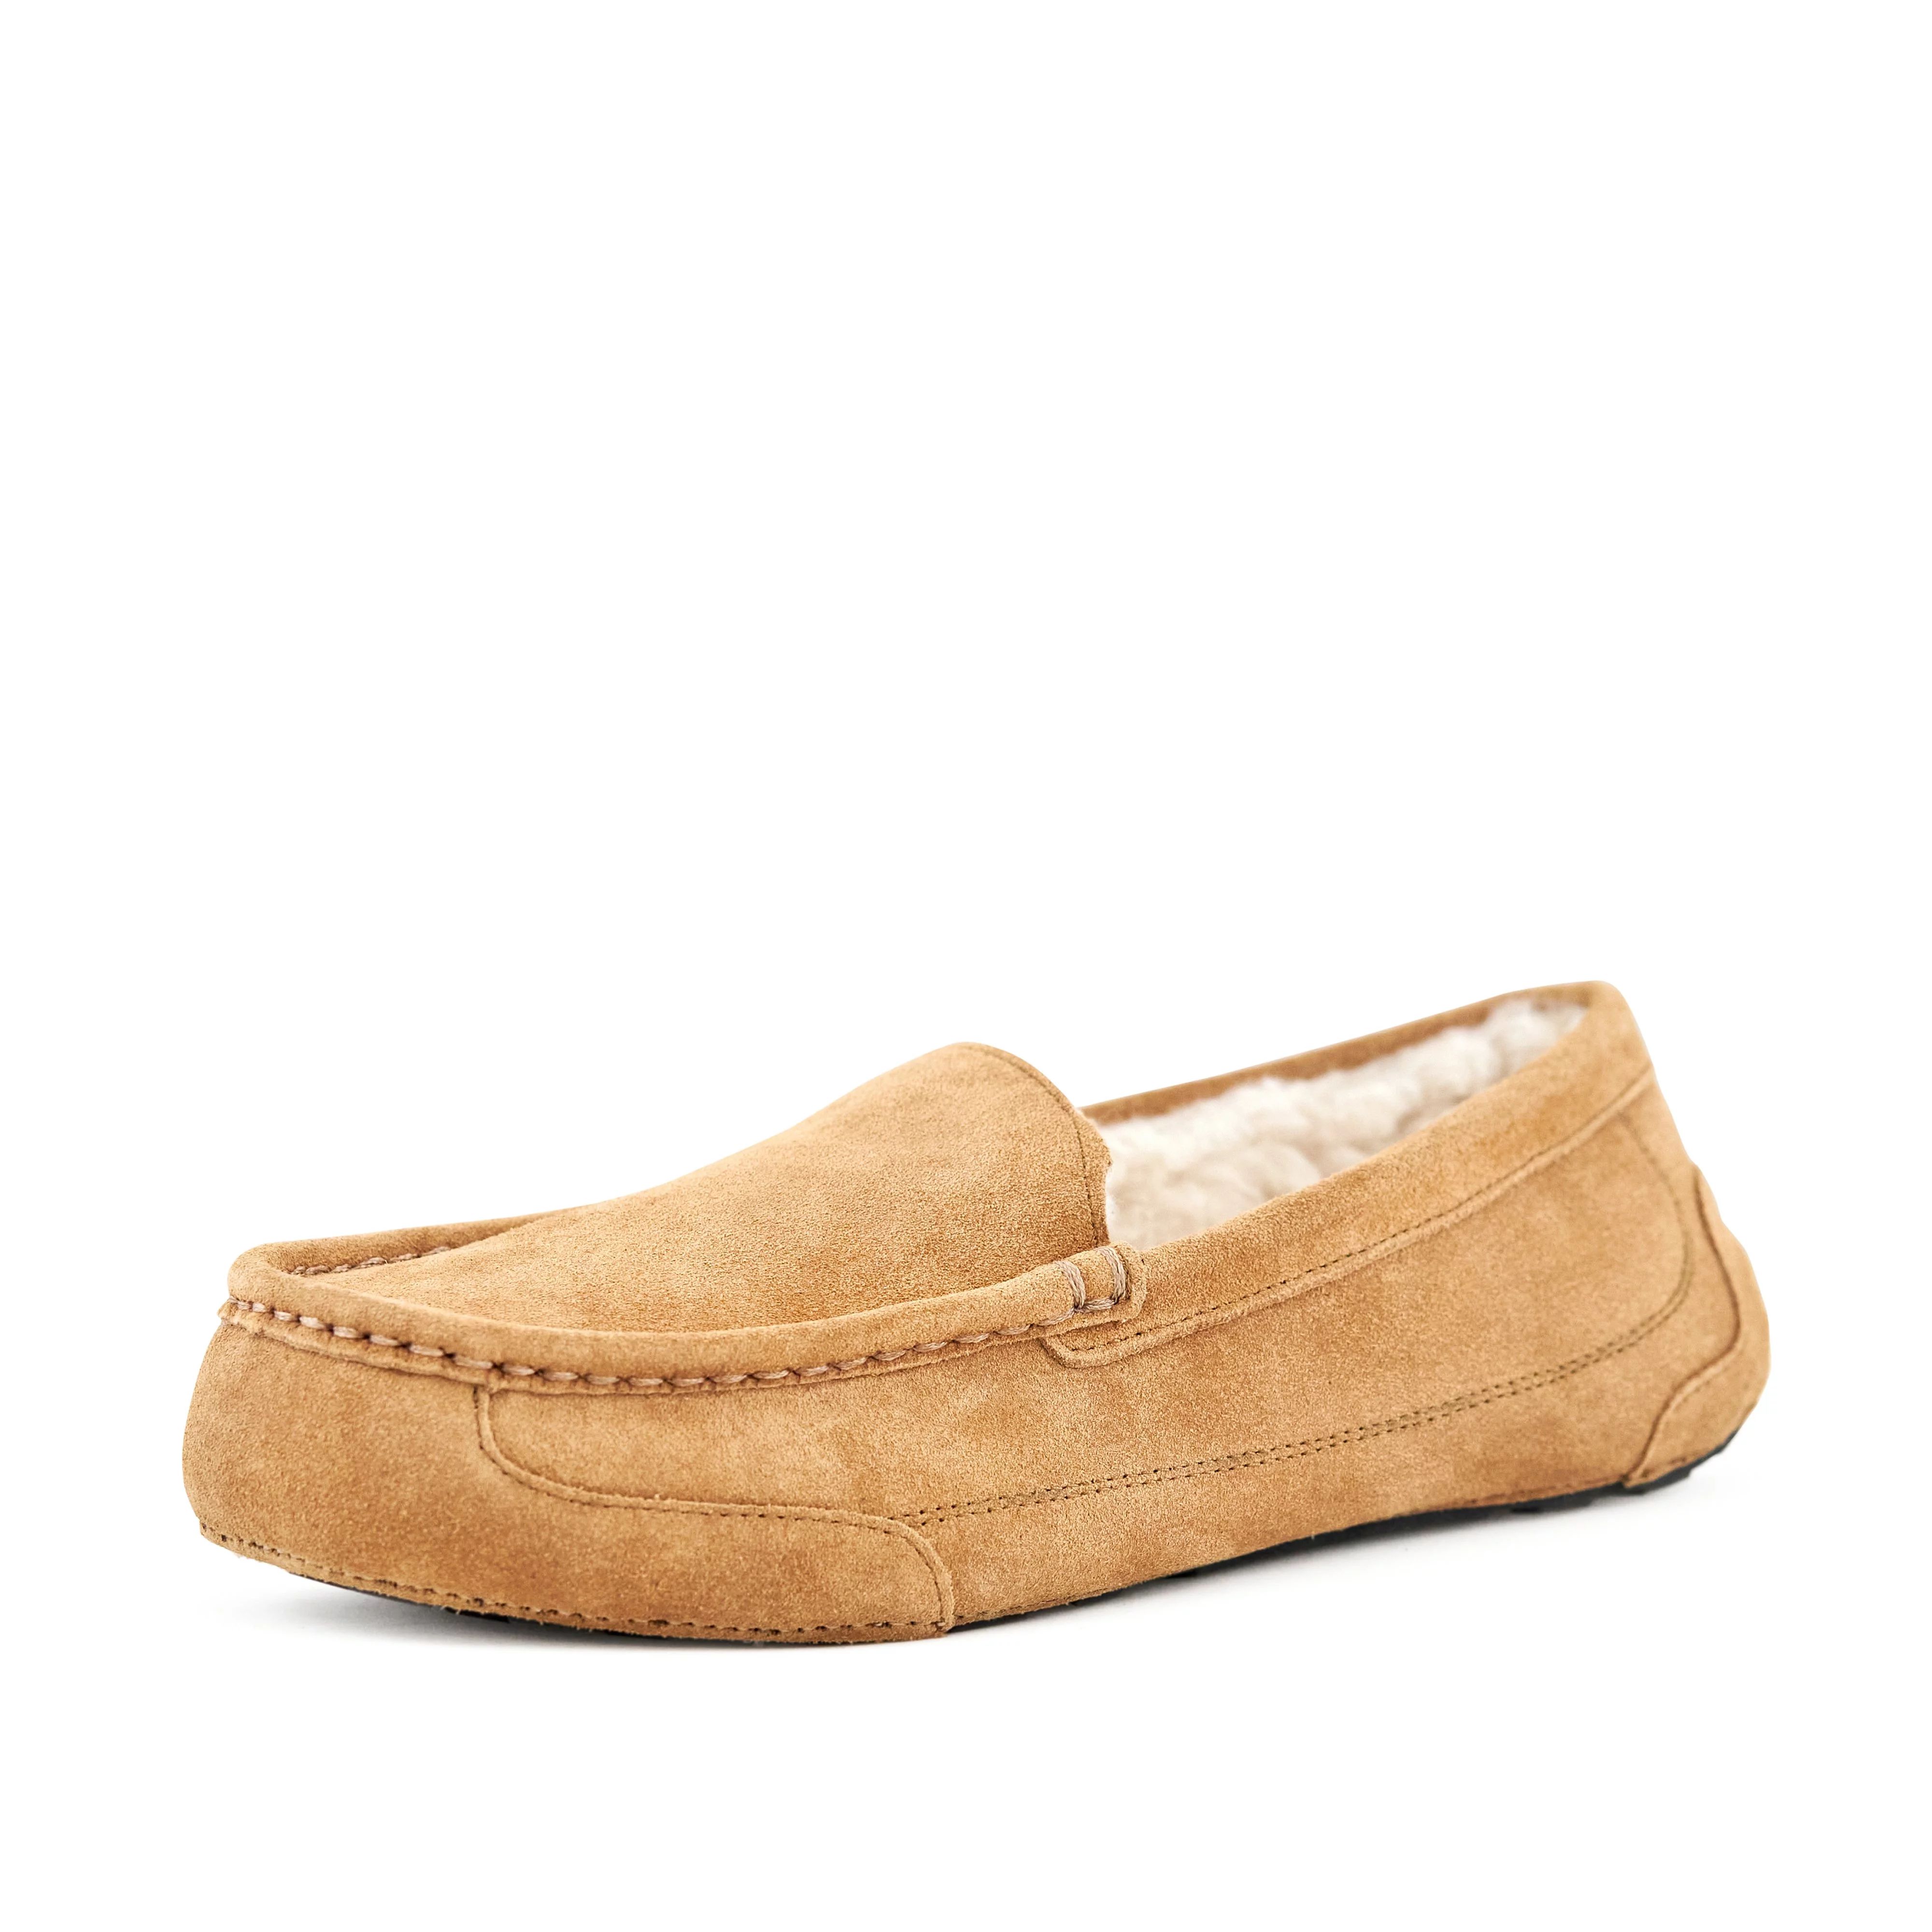 Nest Shoes Men's Toasty Camel Moccasin Slippers | Walmart (US)